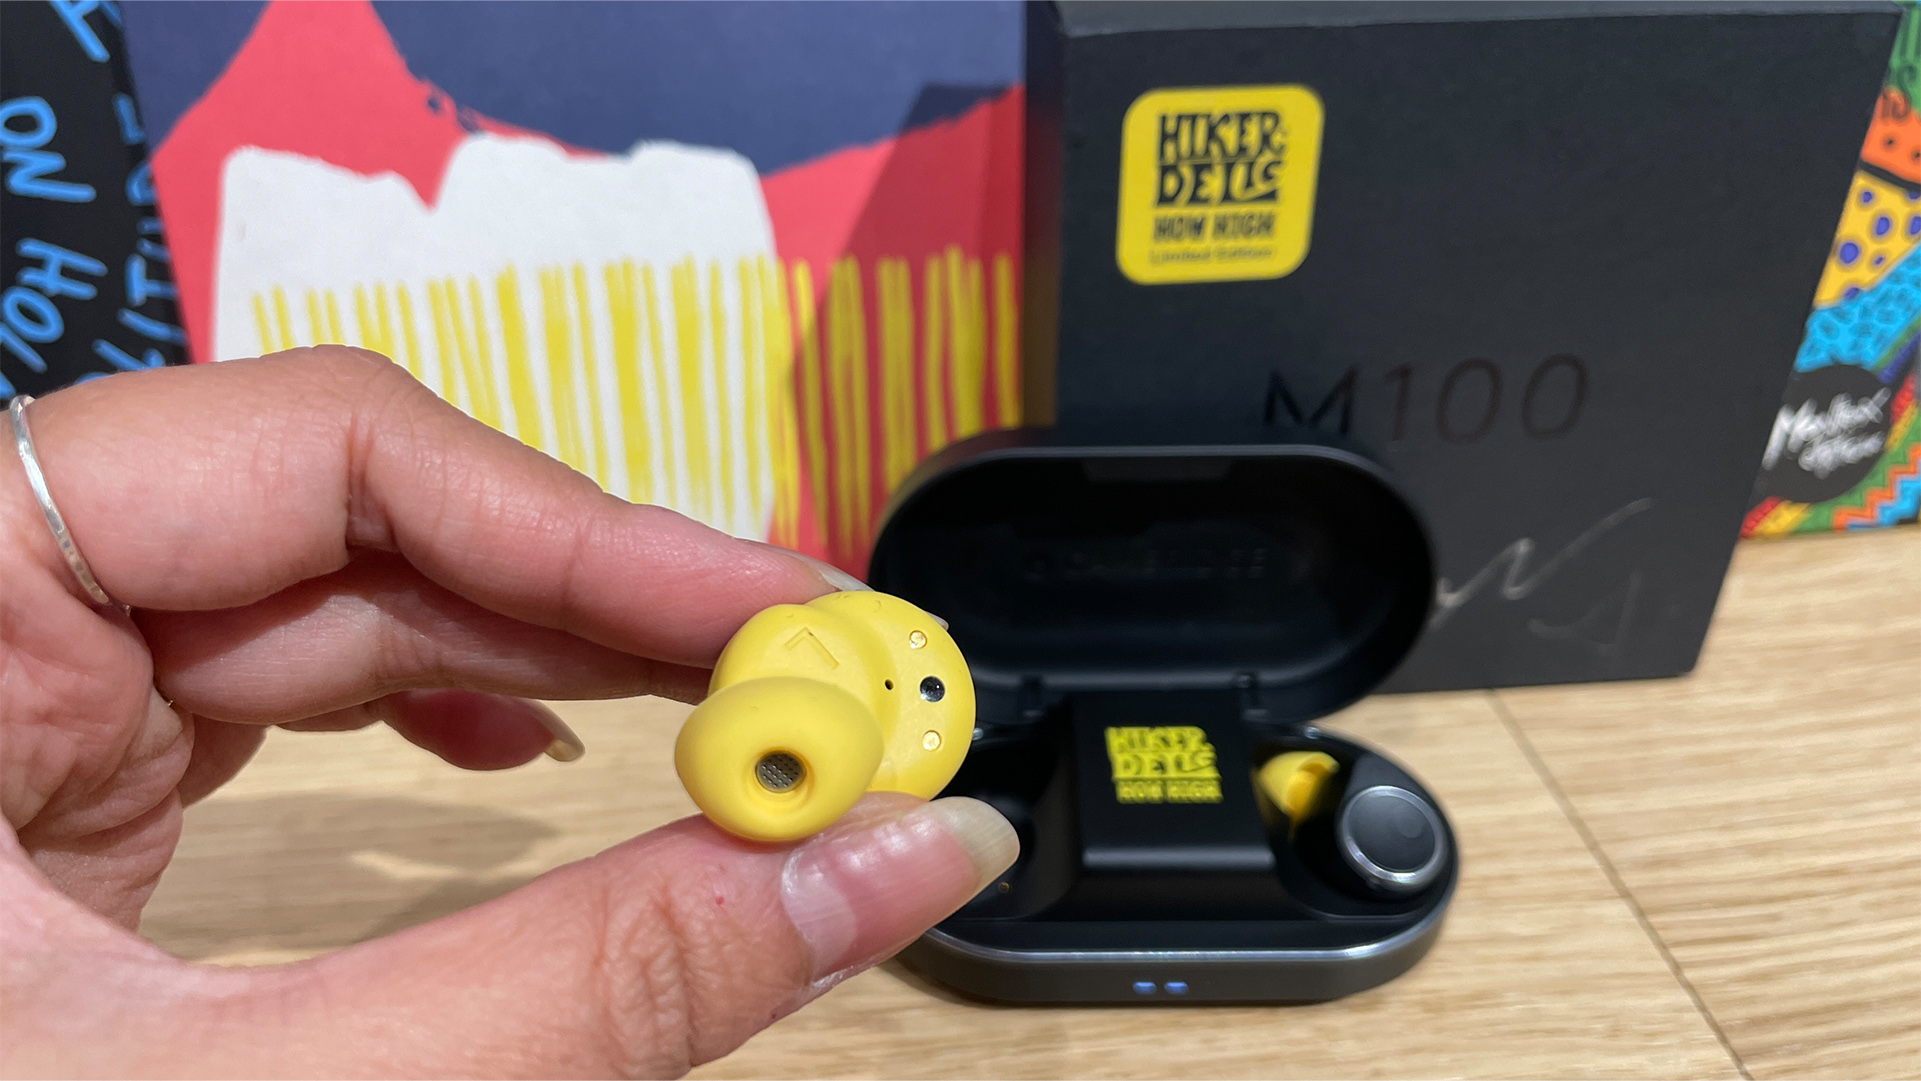 Cambridge Audio Melomania M100 wireless earbuds with alternate yellow tip in hand